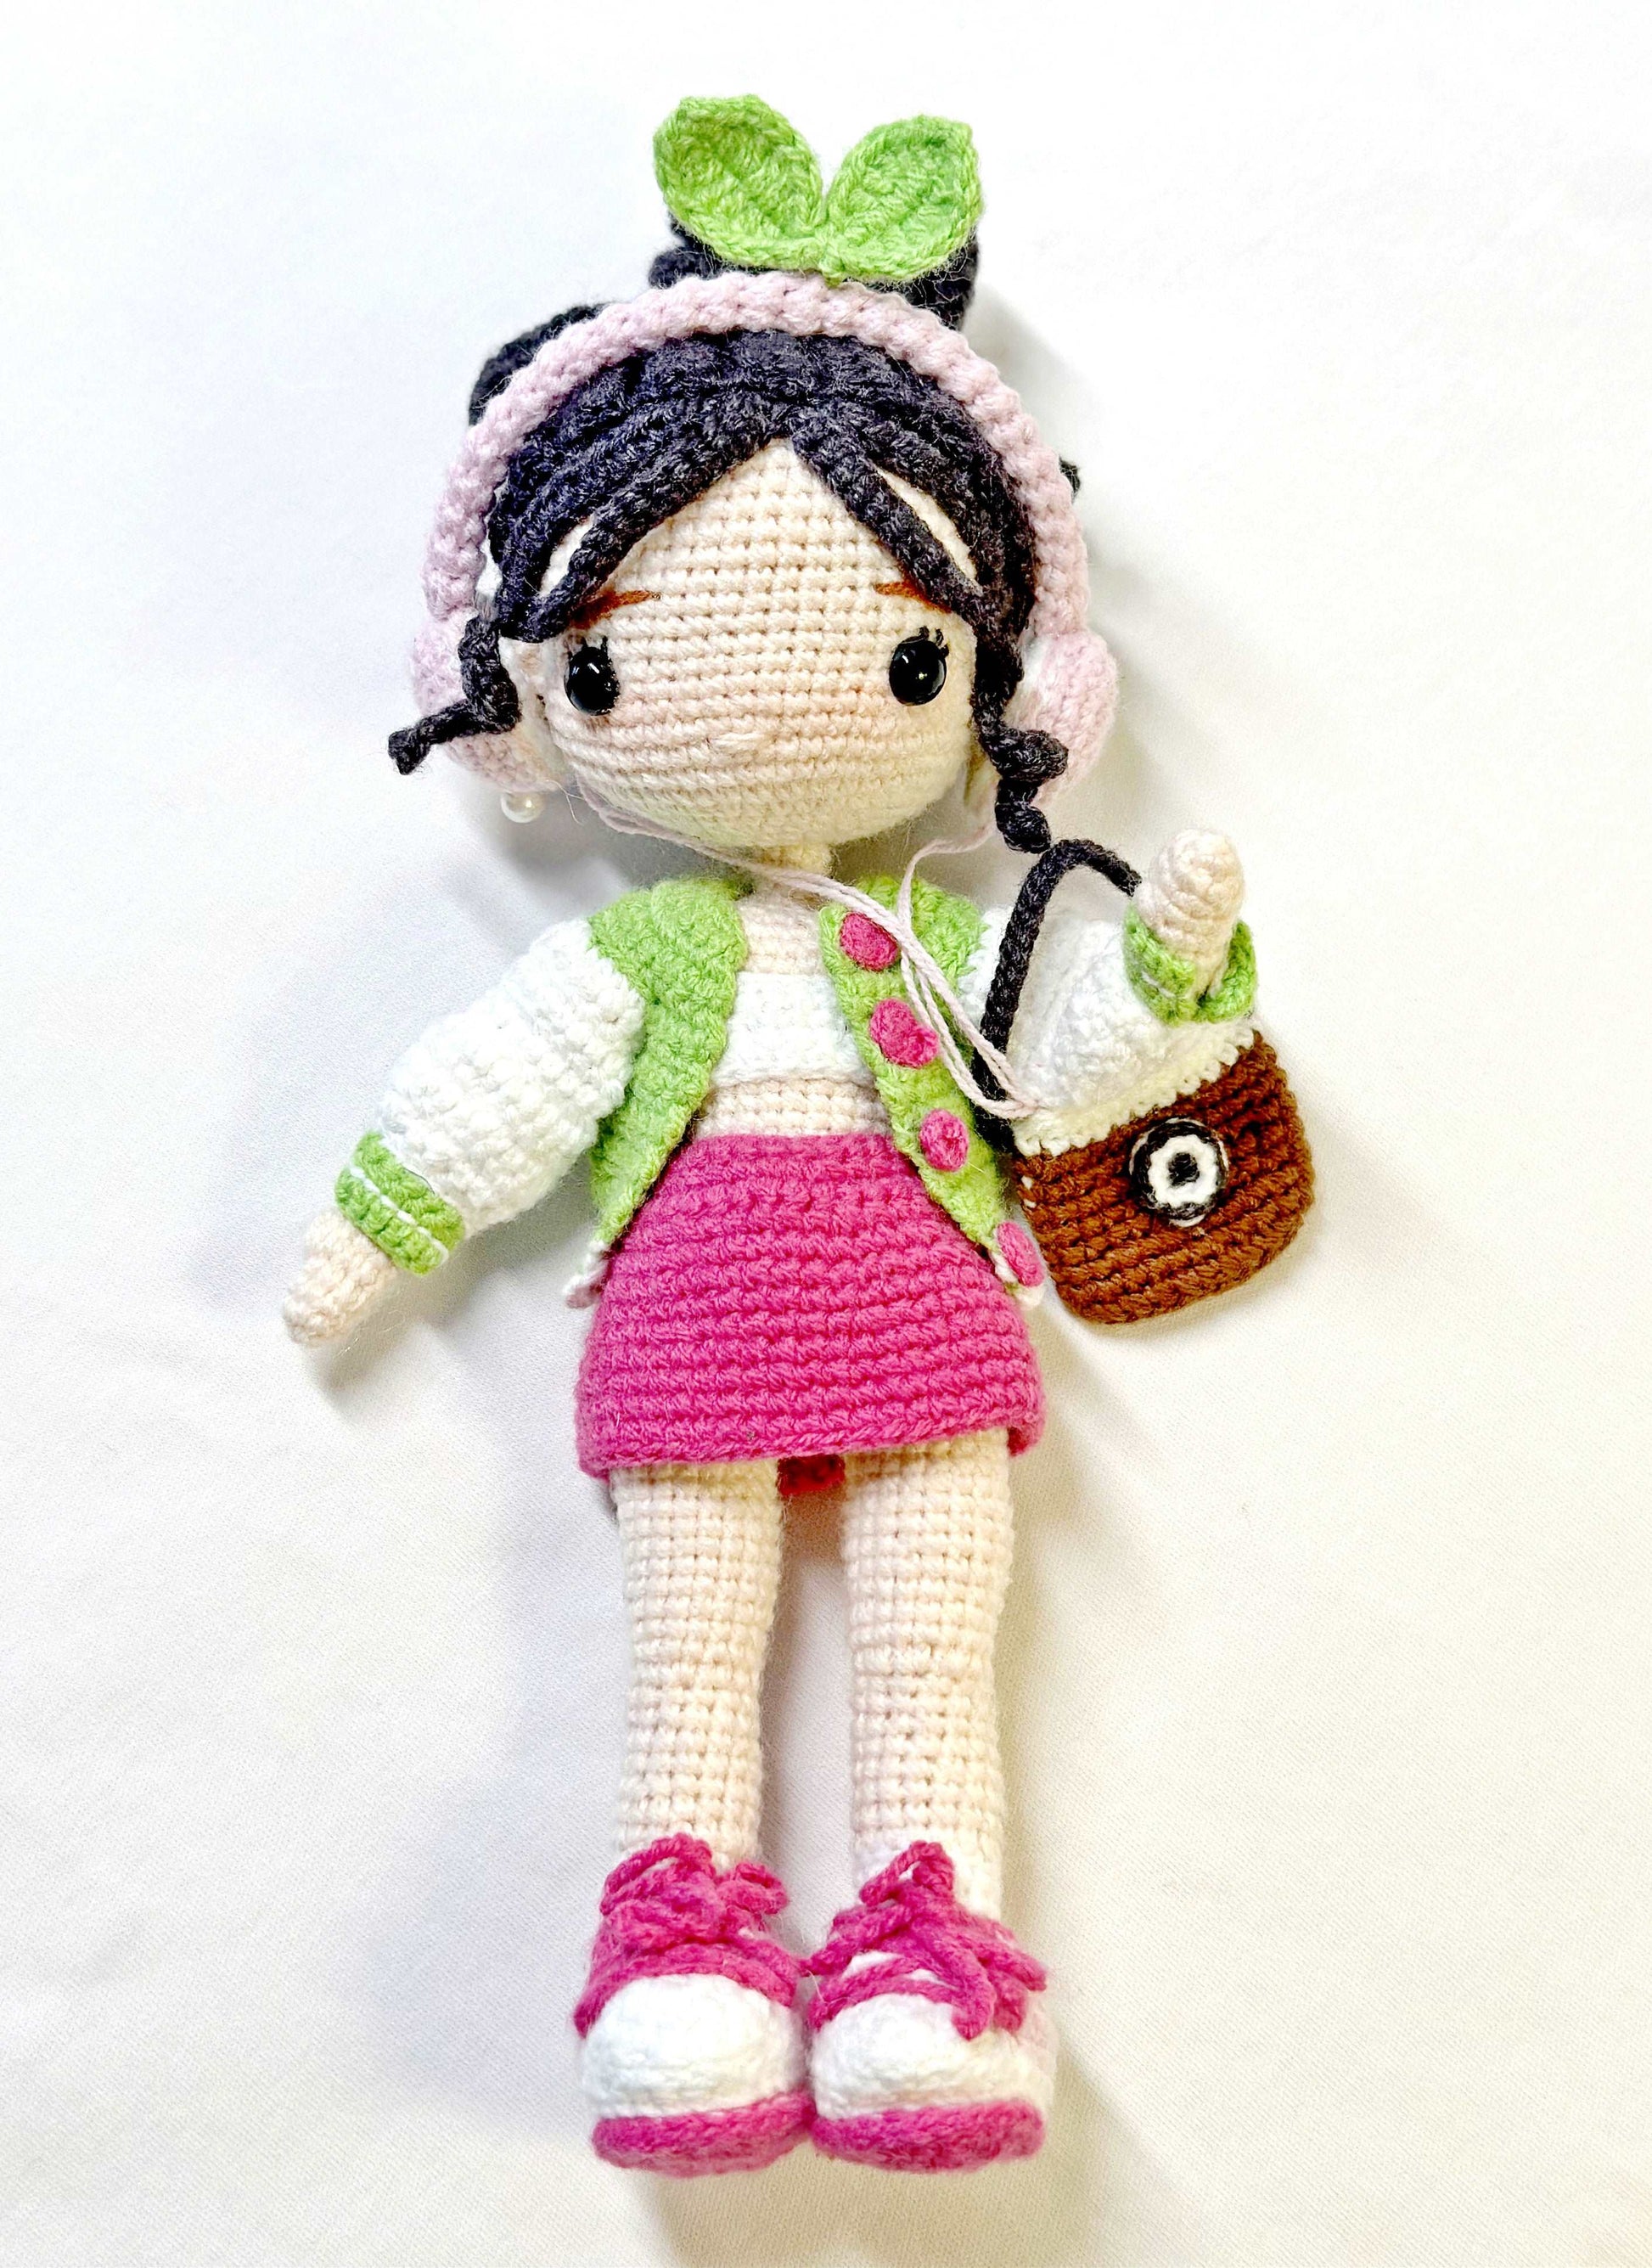 Handmade Crochet Doll for Children's Play and Room Adornment